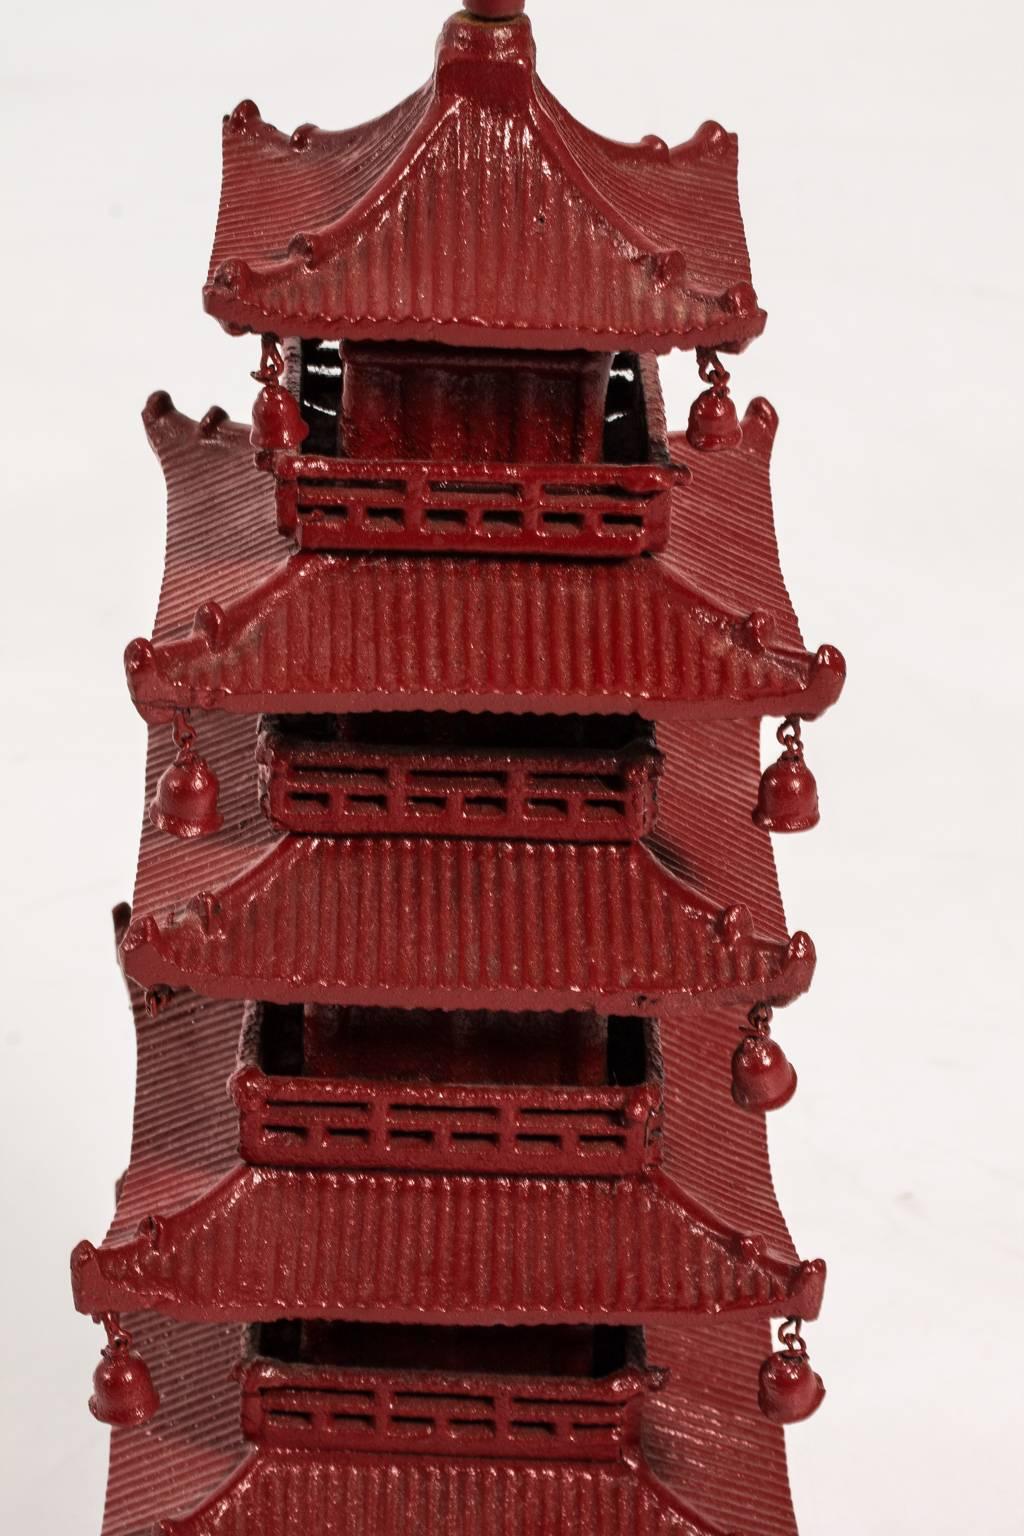 Chinoiserie Red Iron Pagoda Ornament